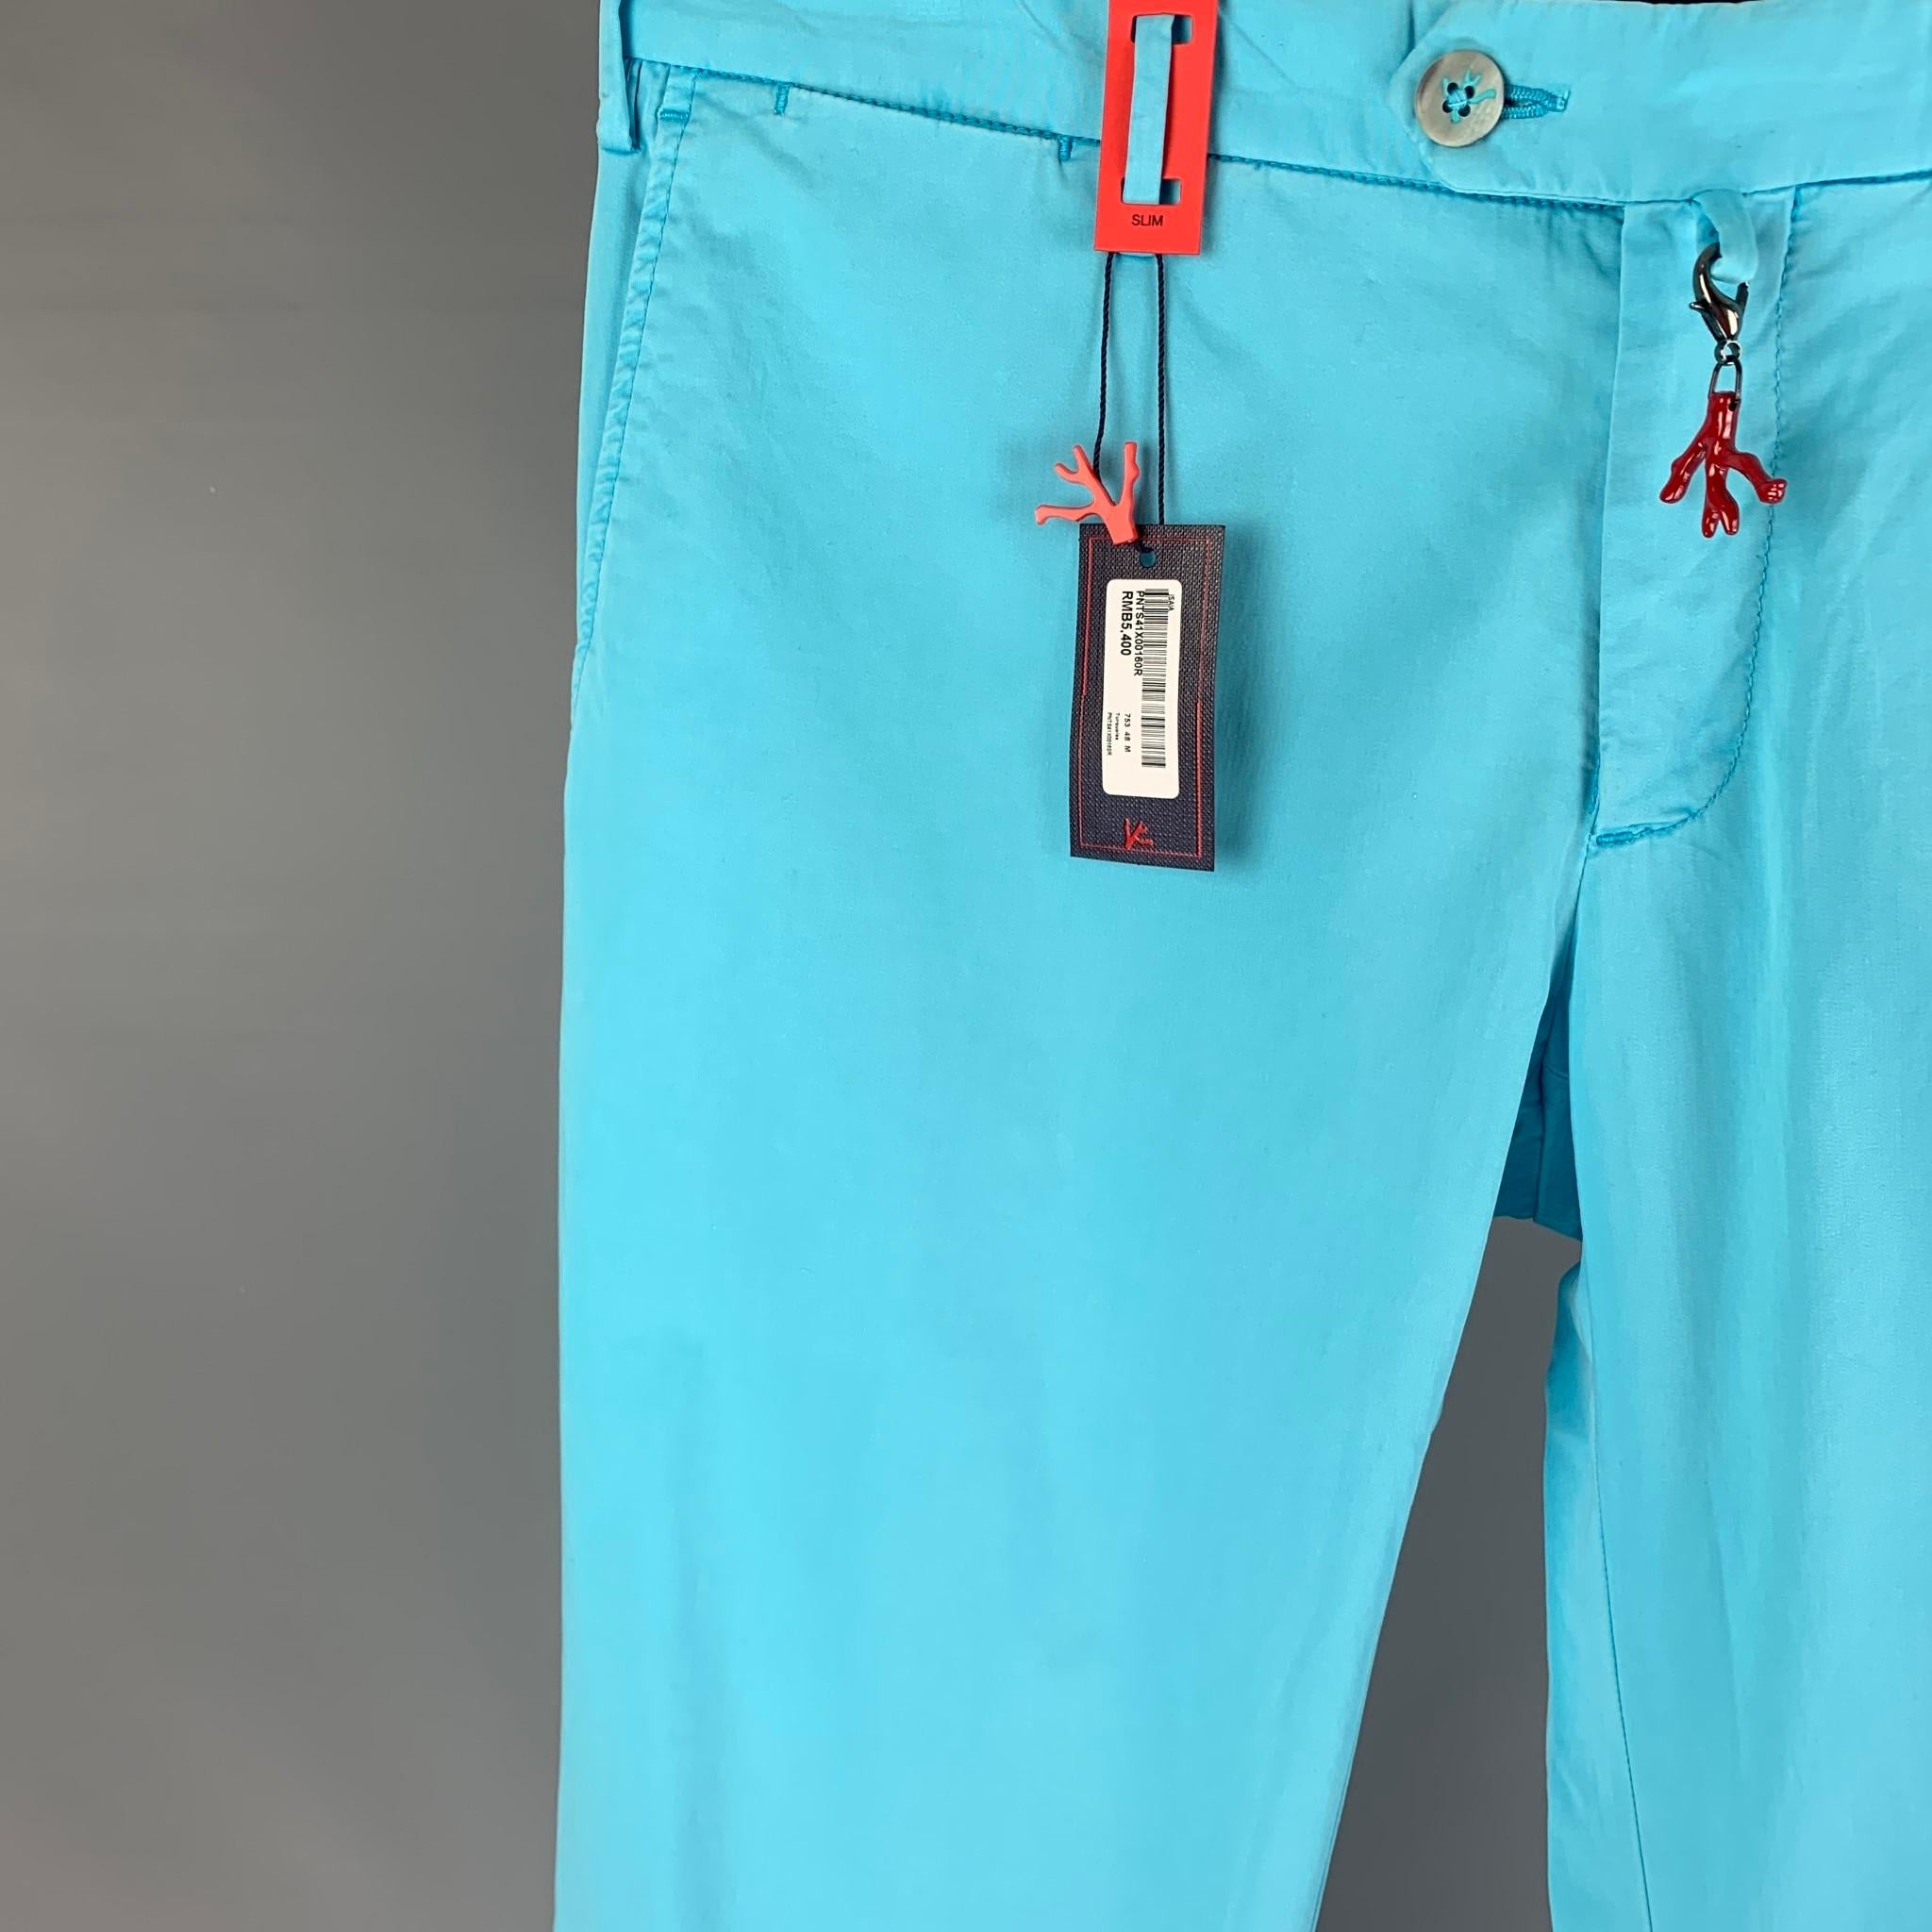 ISAIA pants comes in a aqua blue cotton featuring a slim fit, logo charm, and a zip fly closure. Made in Italy. 

New with tags. 
Marked: 48 R

Measurements:

Waist: 32 in.
Rise: 8.5 in.
Inseam: 35 in.
Leg Opening: 14 in.